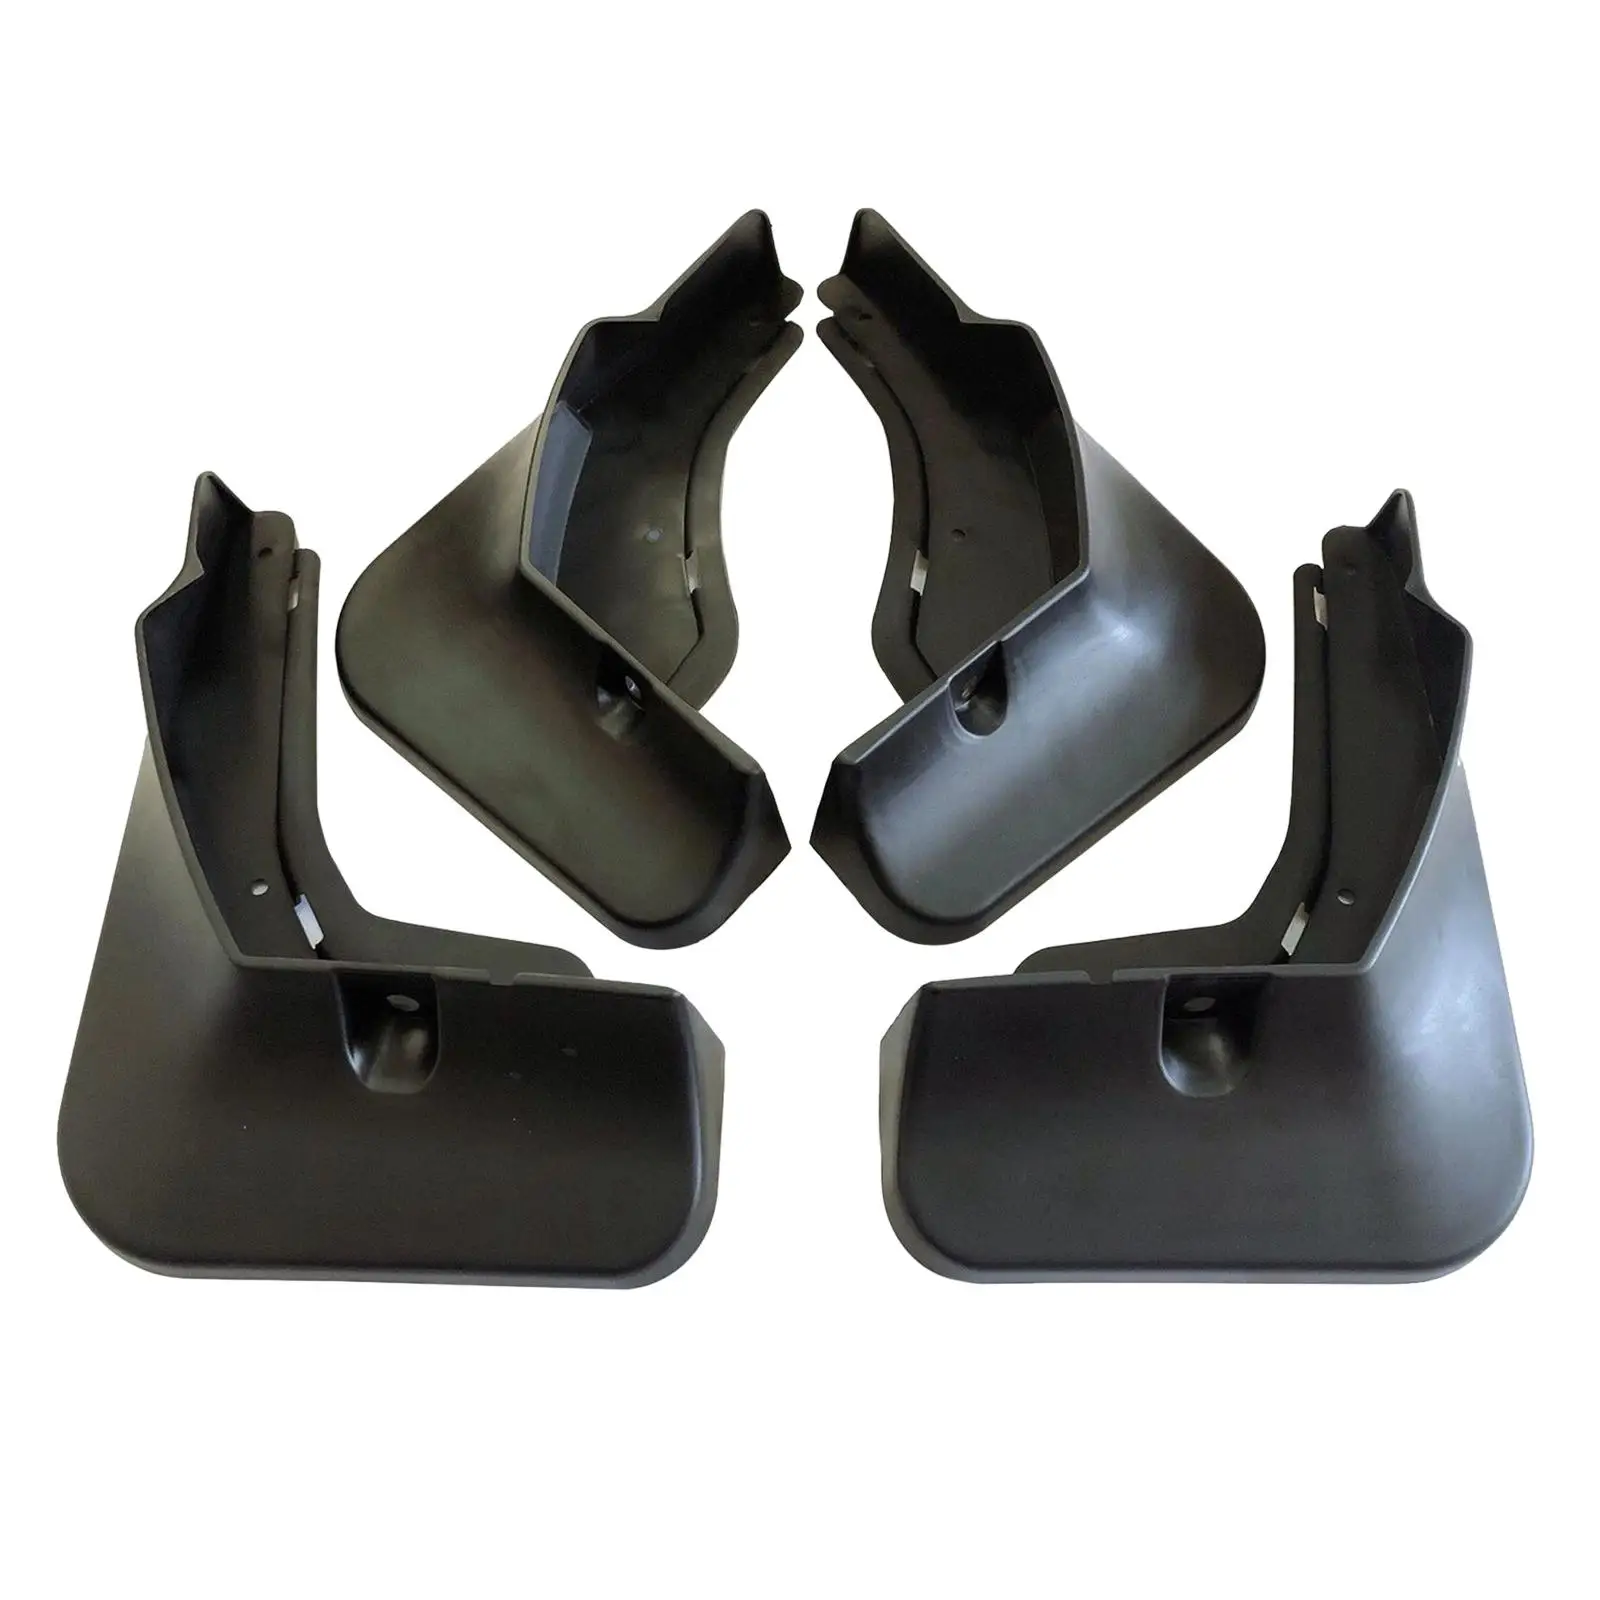 4x Car Mudguard Replacement Easy to Install Muds Flaps Accessories Front Rear Mudflaps Professional for Byd Song Plus Pro